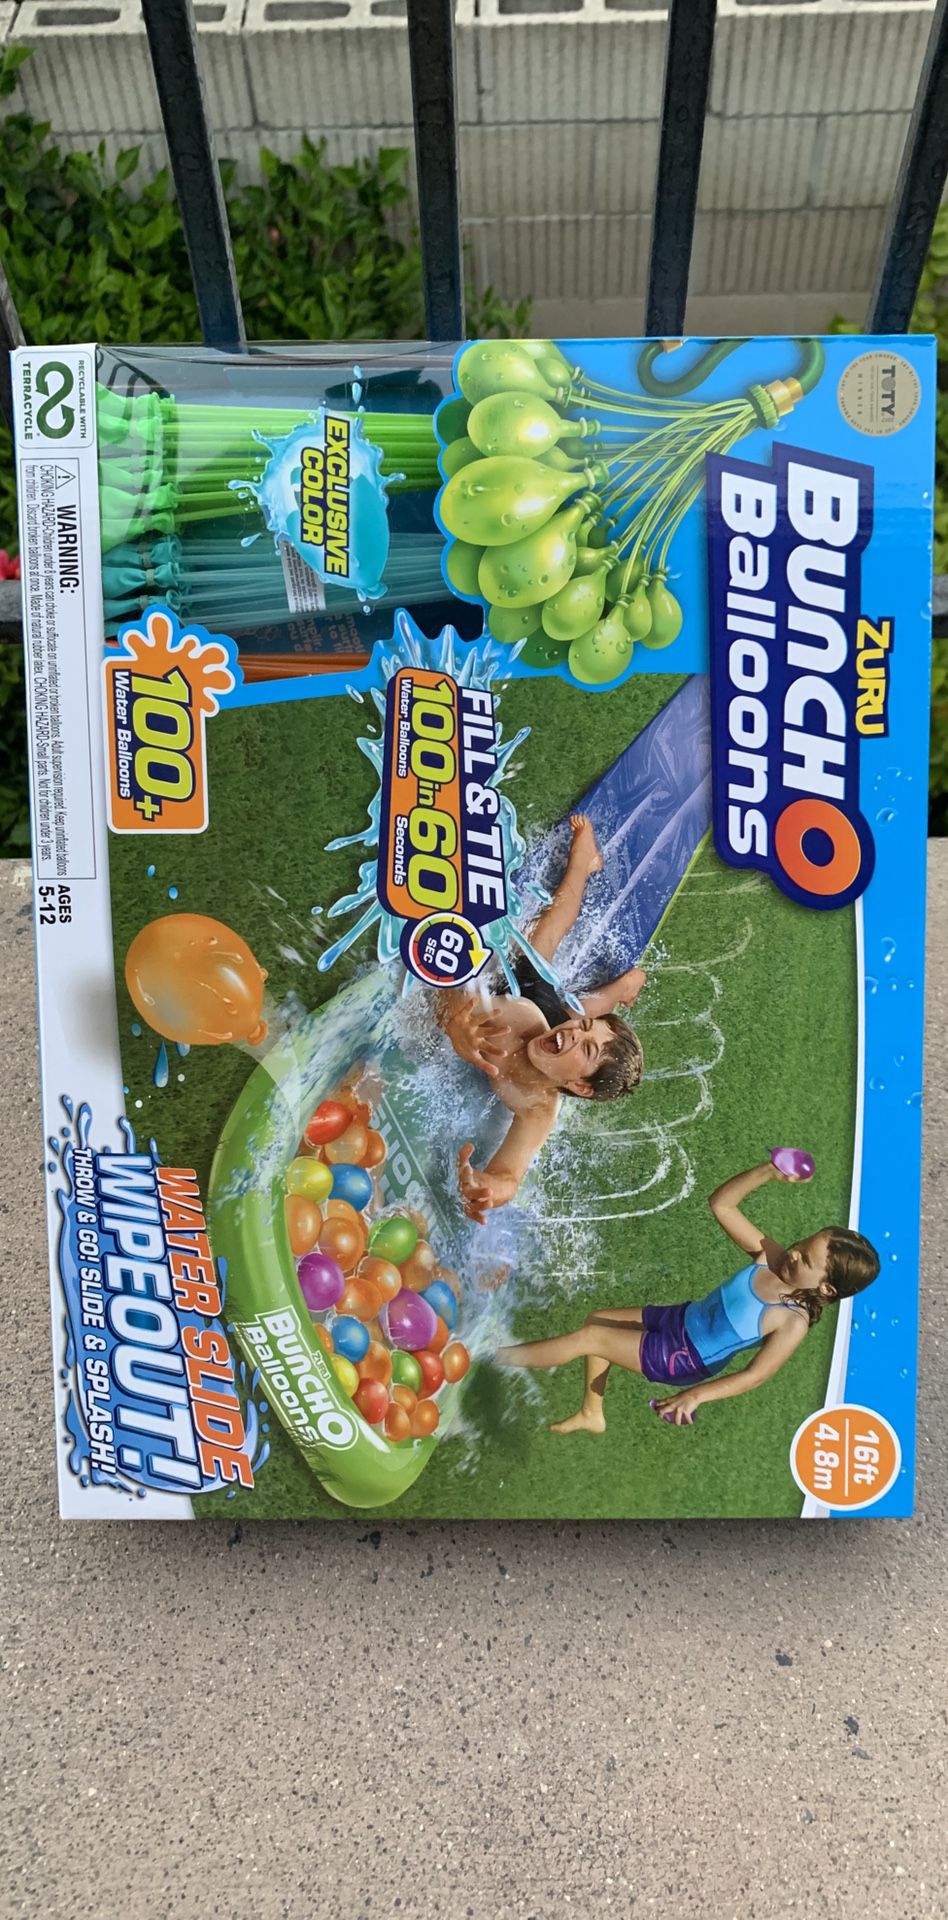 NEW 16 FEET WATER SLIDE WITH 100+ EASY WATER BALLOONS NEW NEVER USED